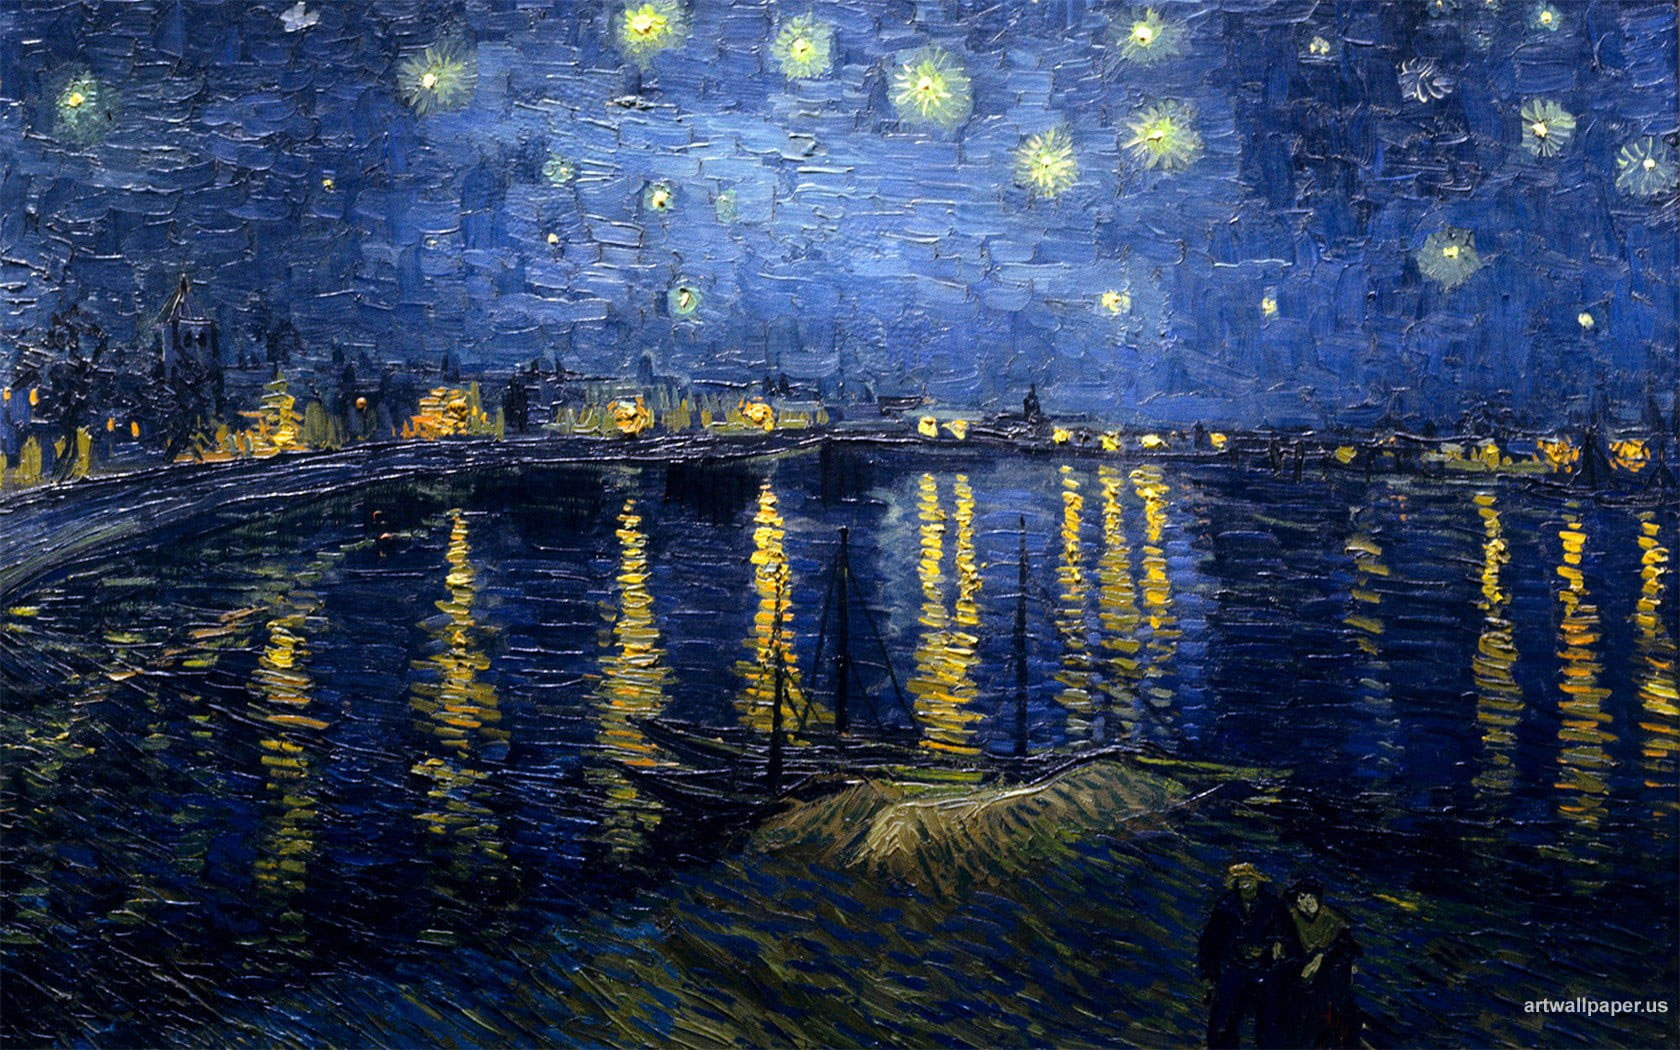 Body of water and stars painting wallpaper, Vincent van Gogh, classic art